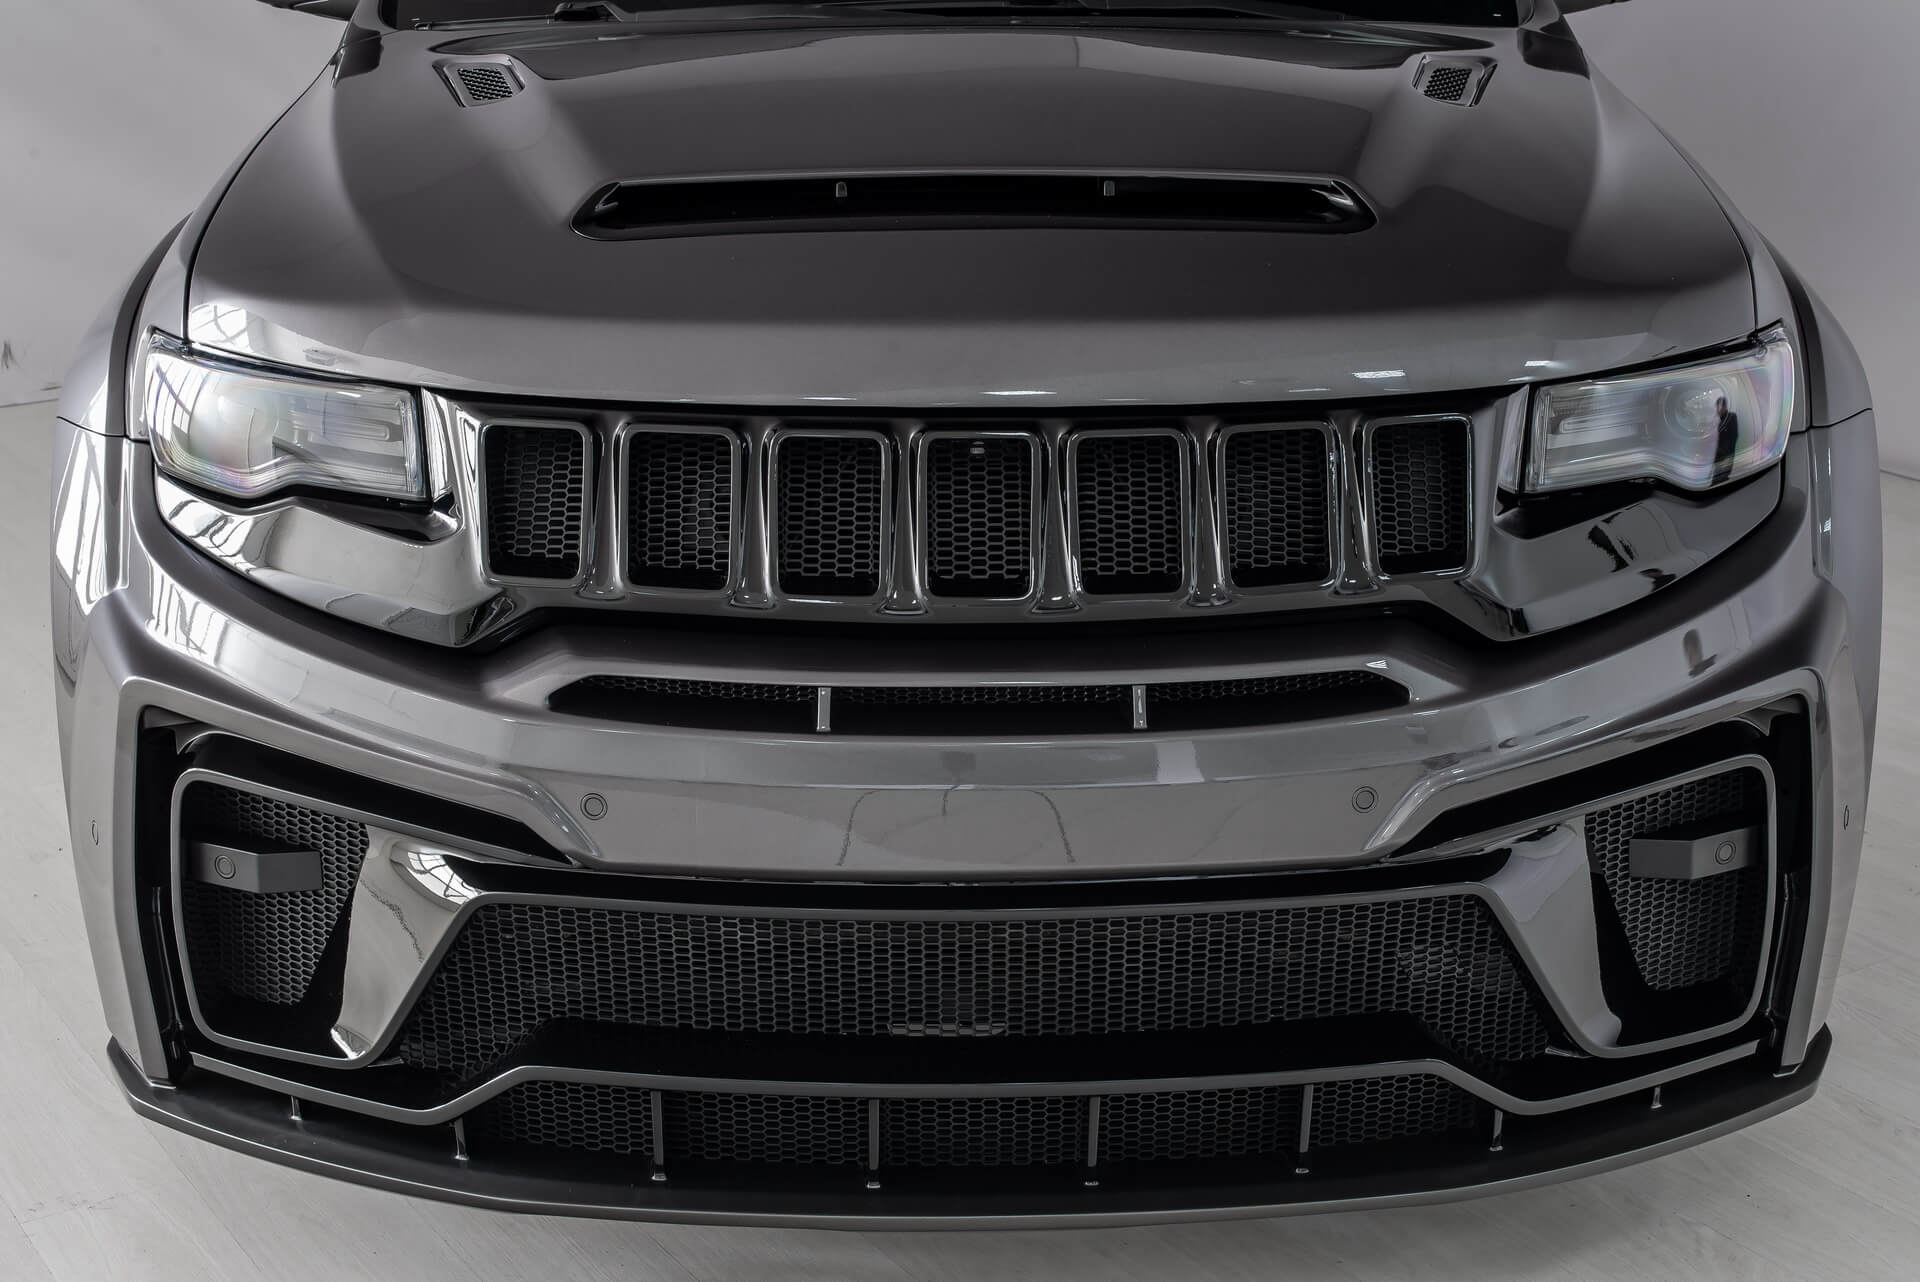 Check price and buy SCL Performance Titan  body kit for Jeep Grand Cherokee